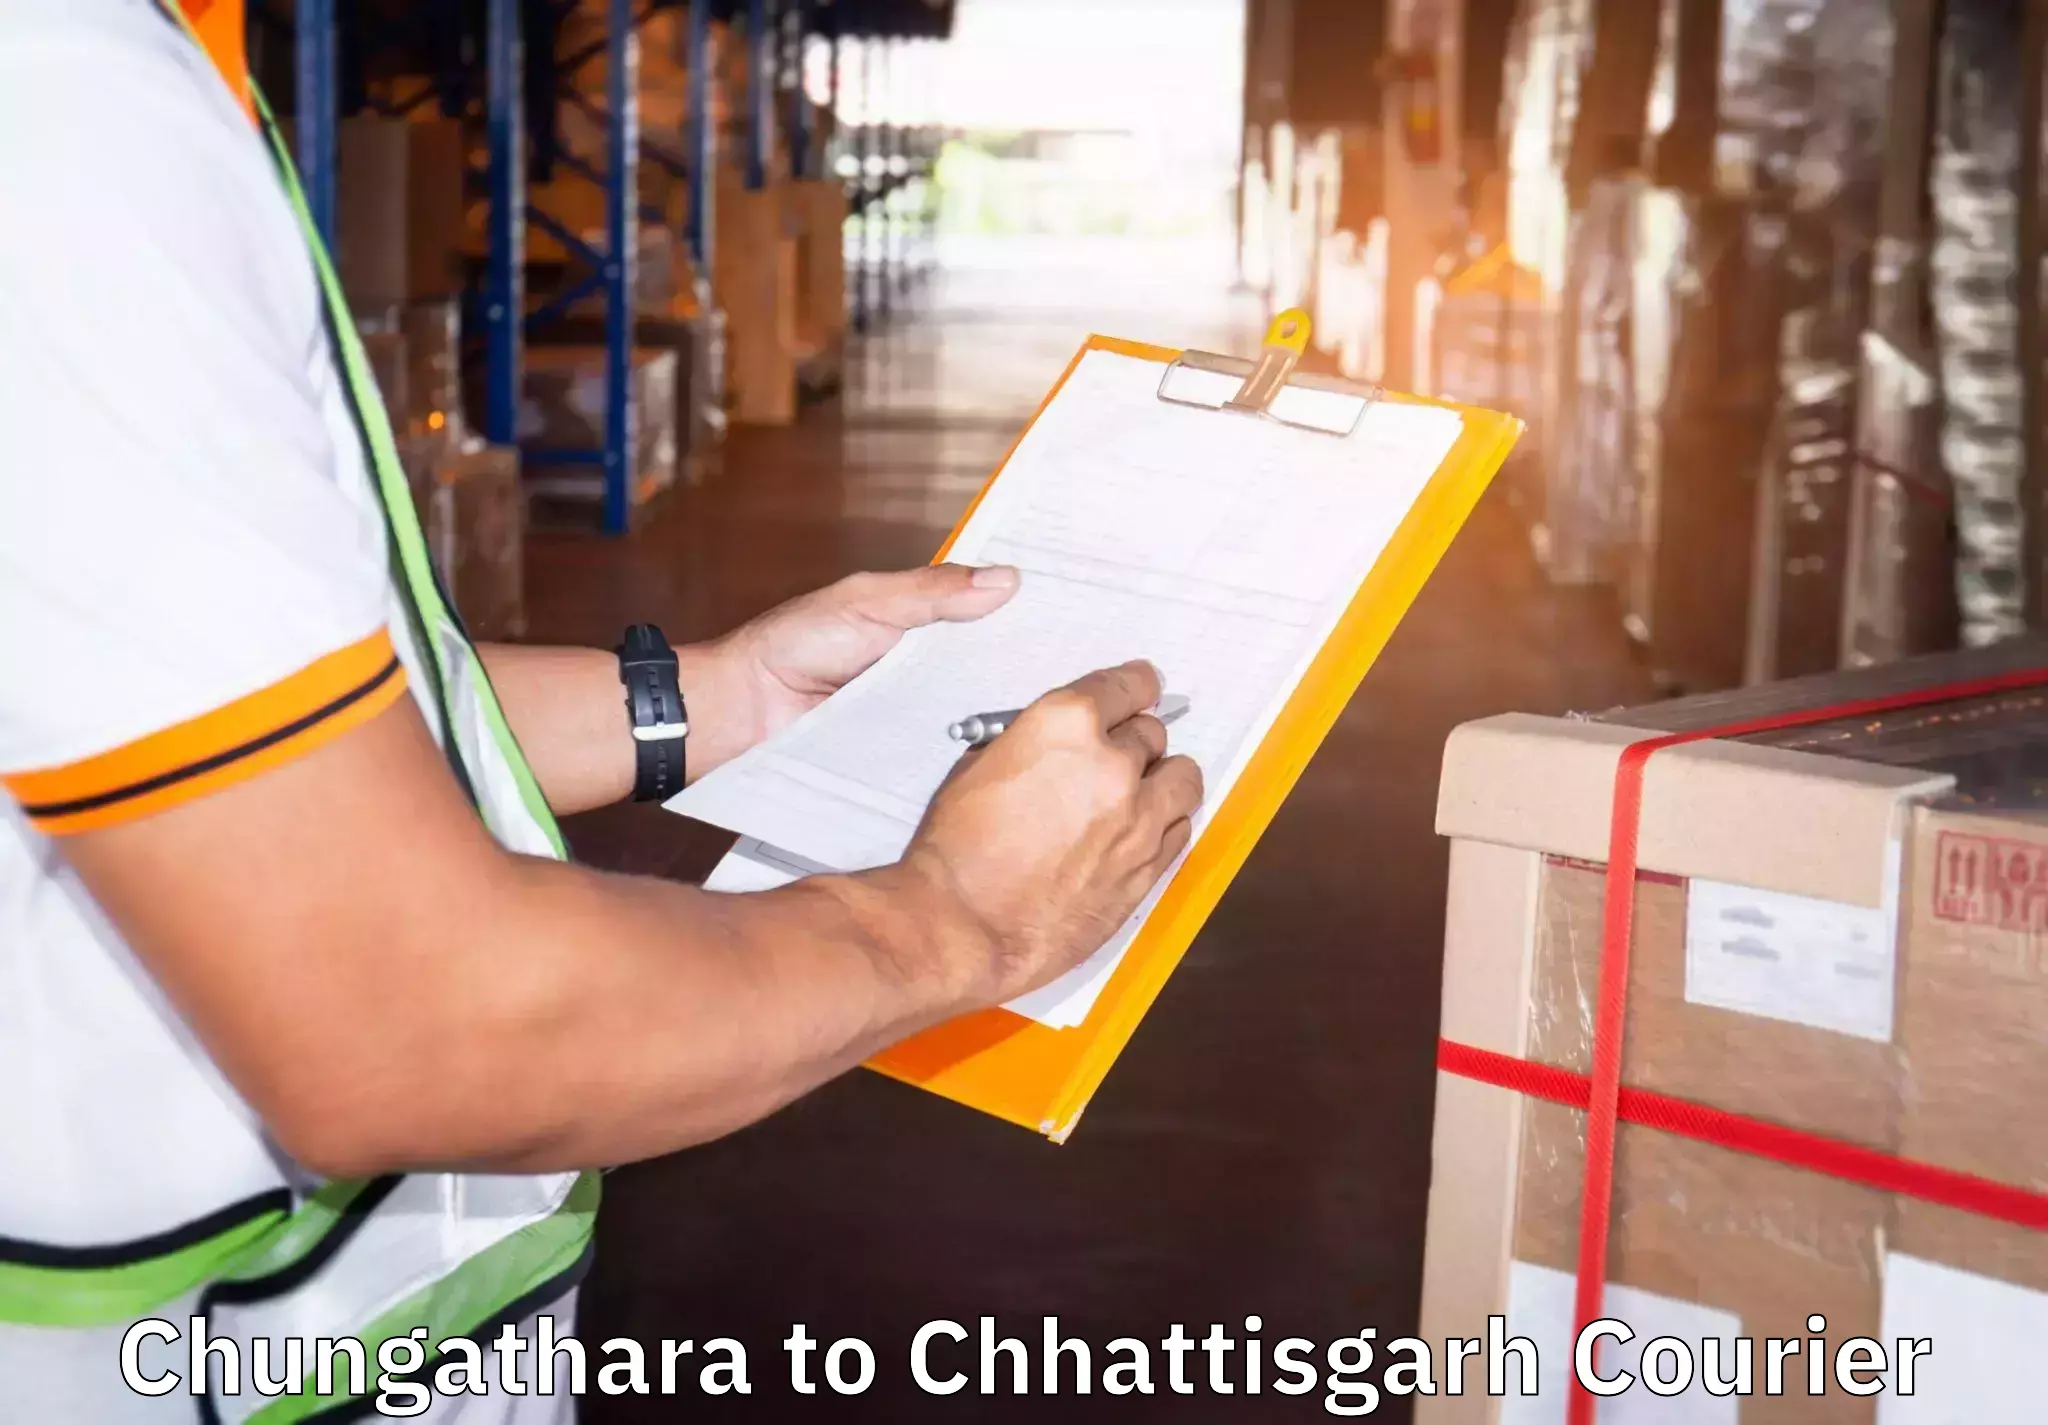 Trusted relocation experts Chungathara to Dharamjaigarh